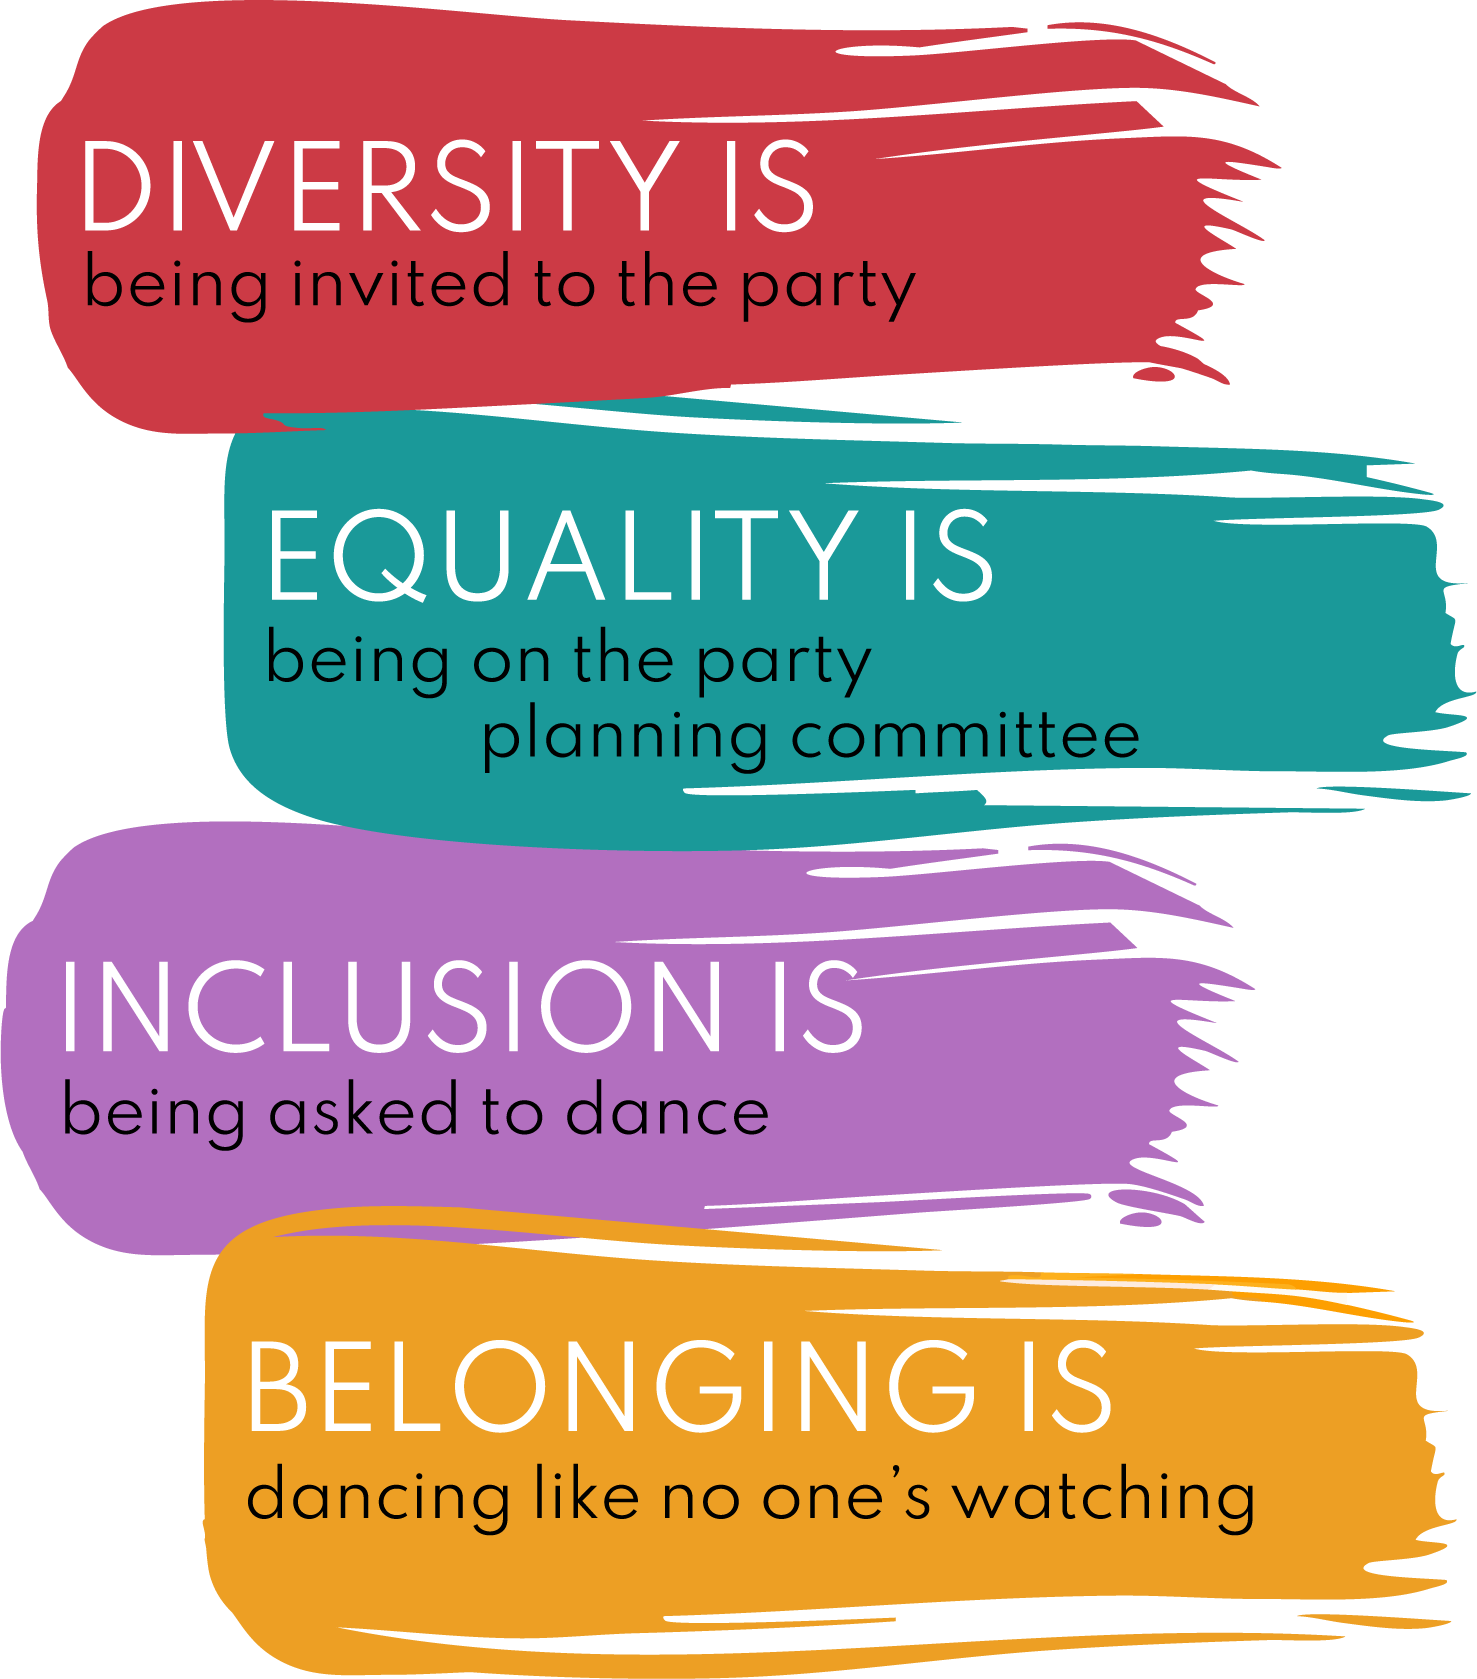 illustration of diversity equality inclusion and belonging